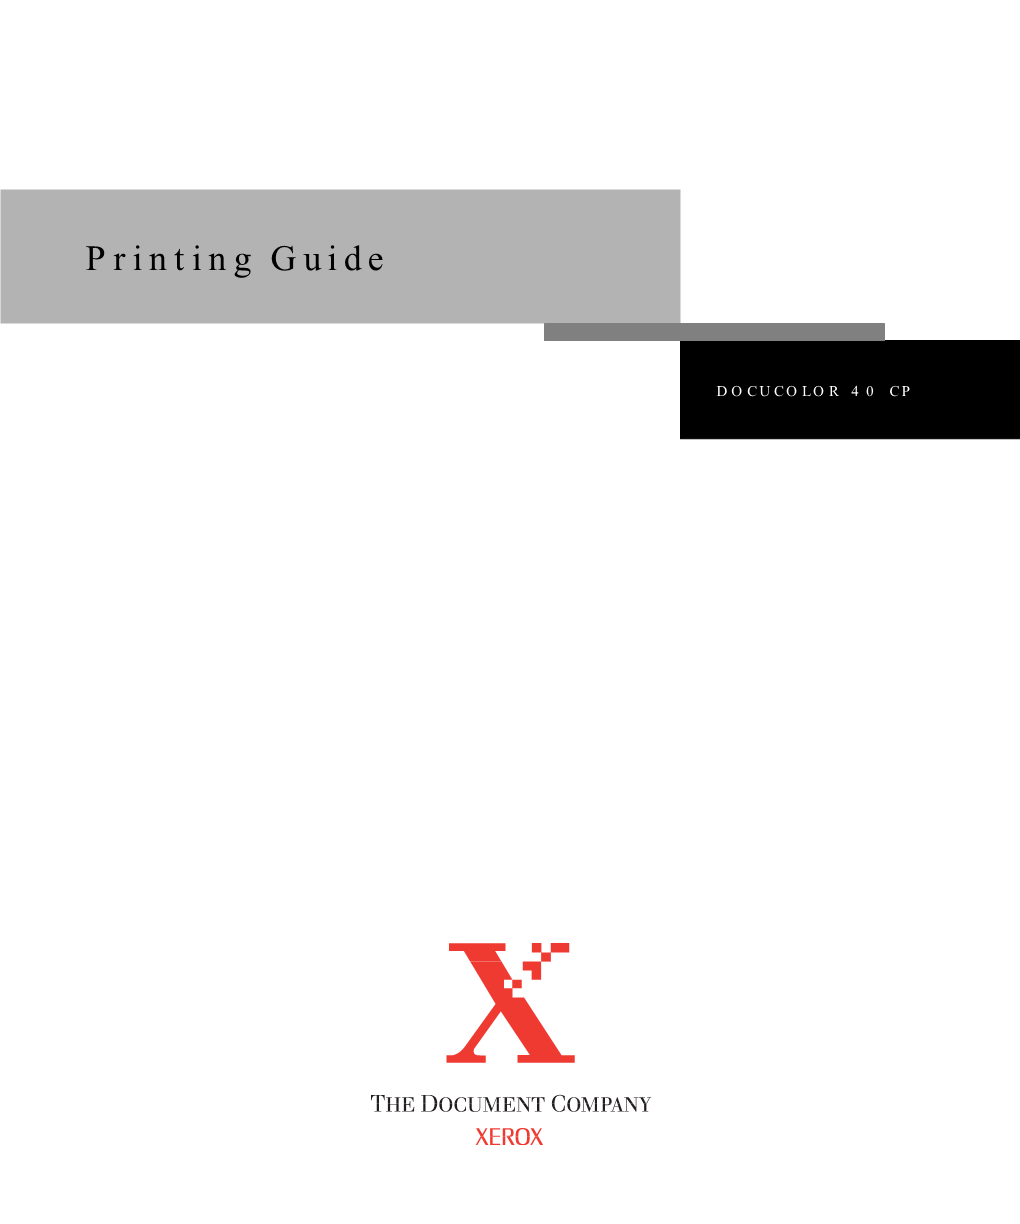 Docucolor 40 CP Printing Guide